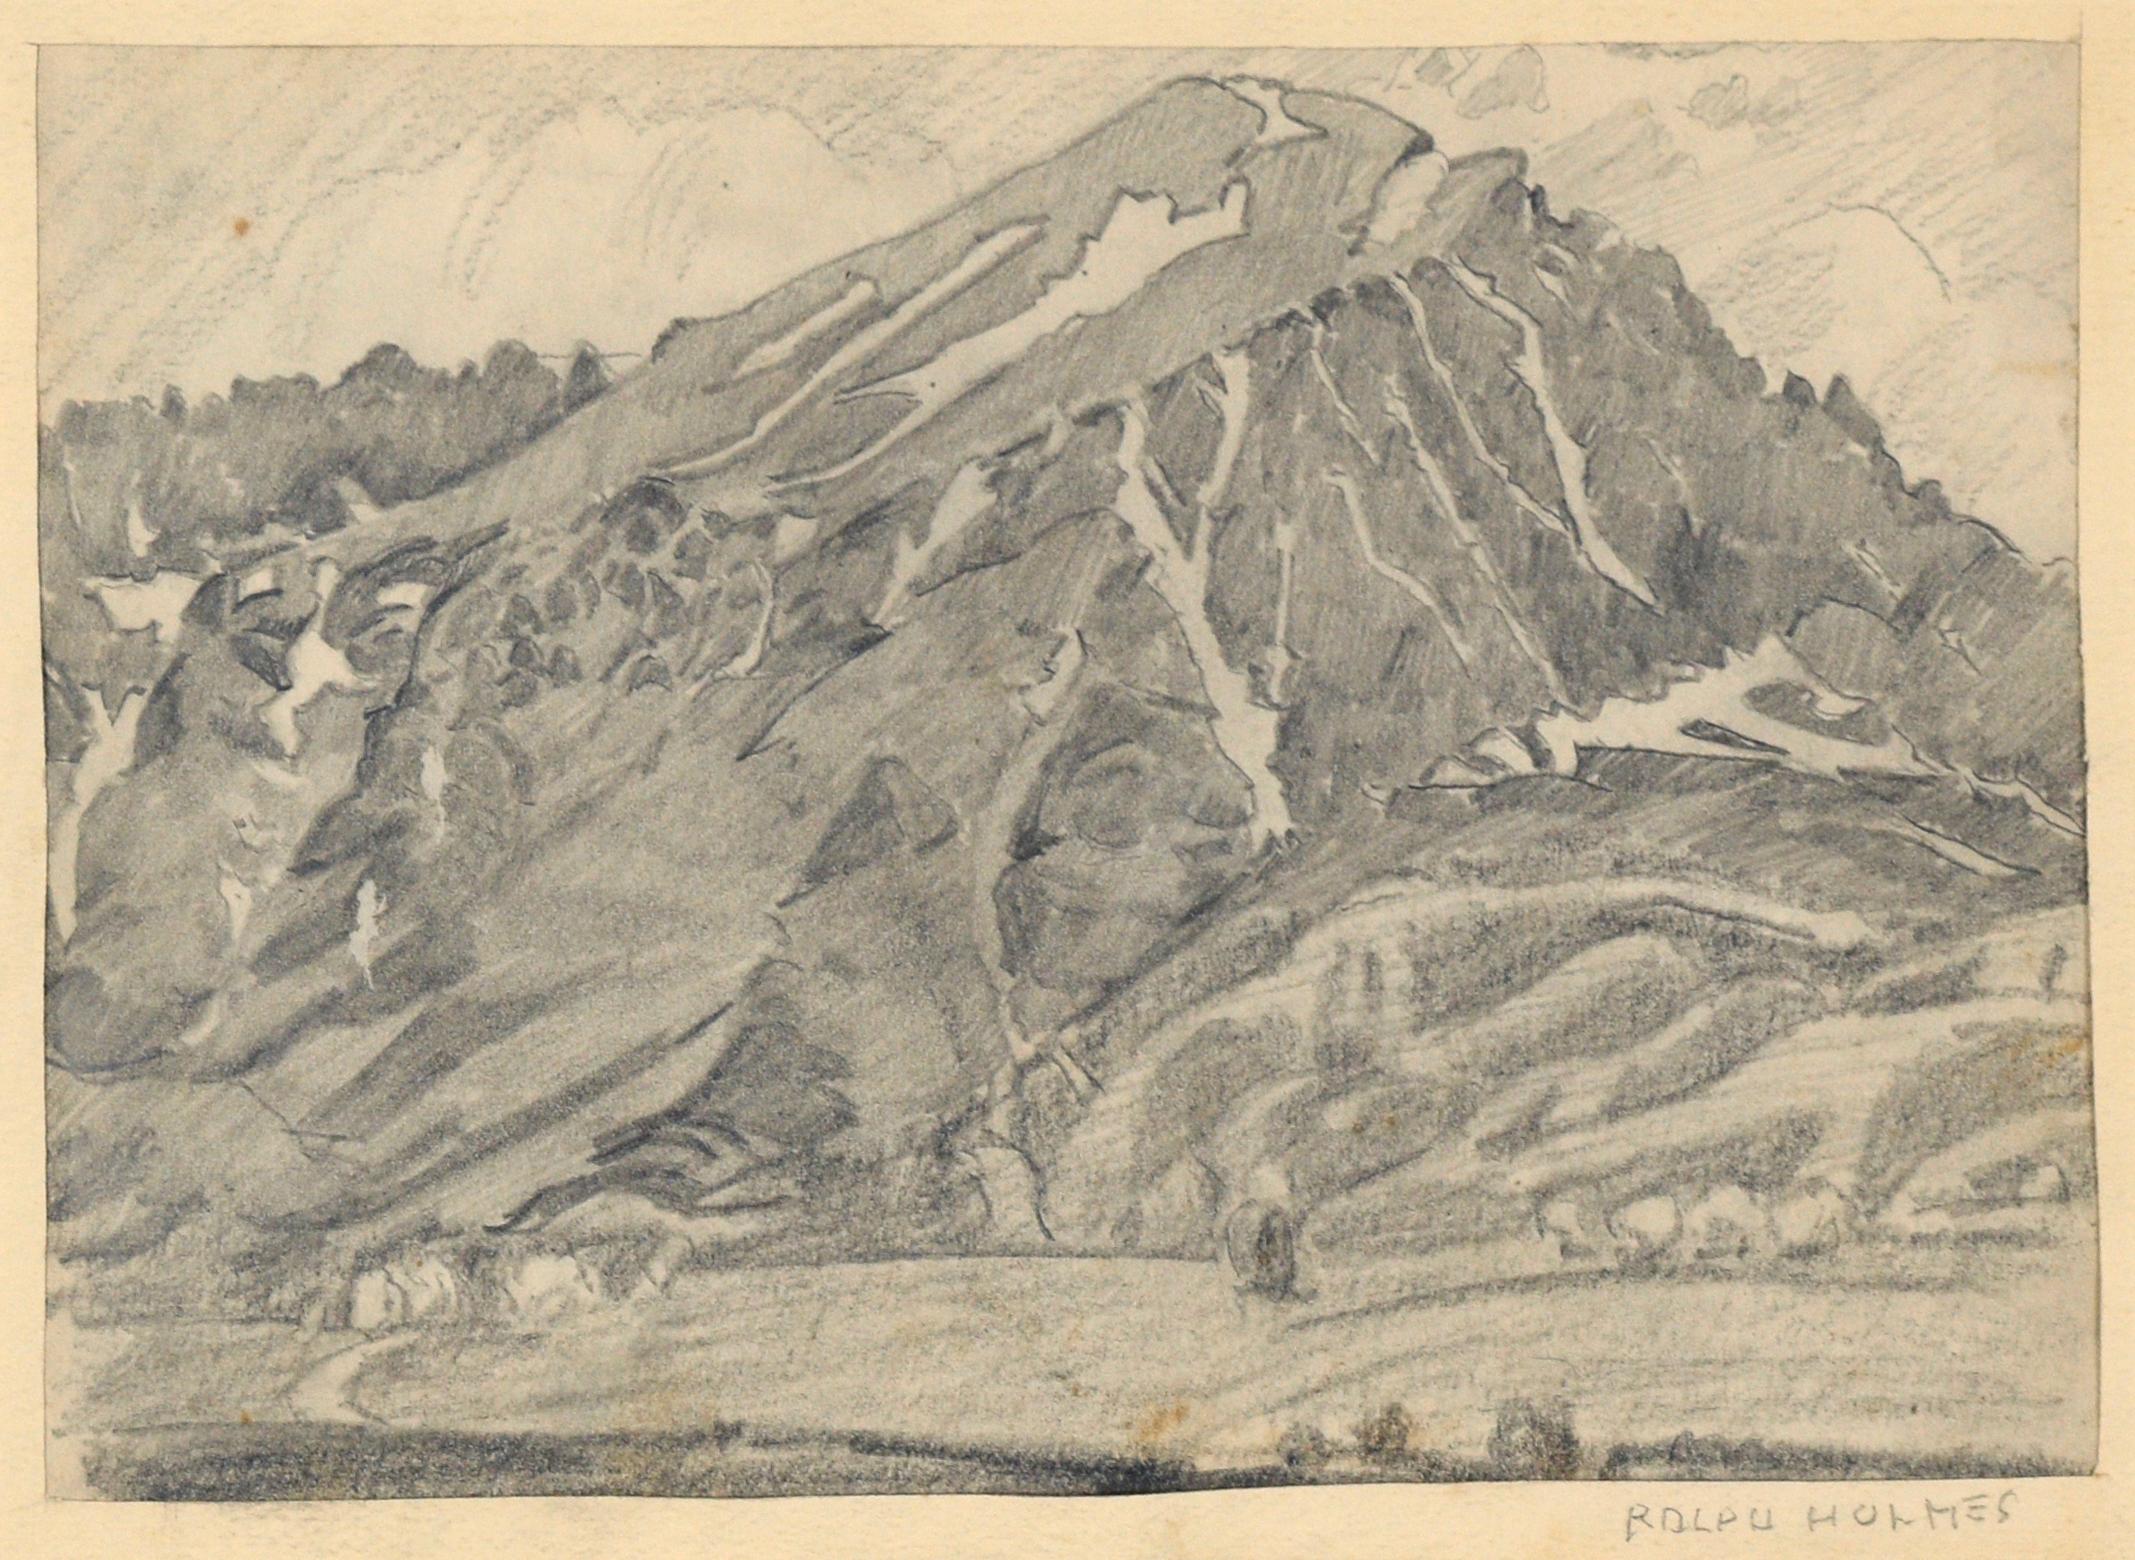 San Gabriel Mountain Landscape in Black and White - Graphite Pencil on Paper - Art by Ralph Holmes